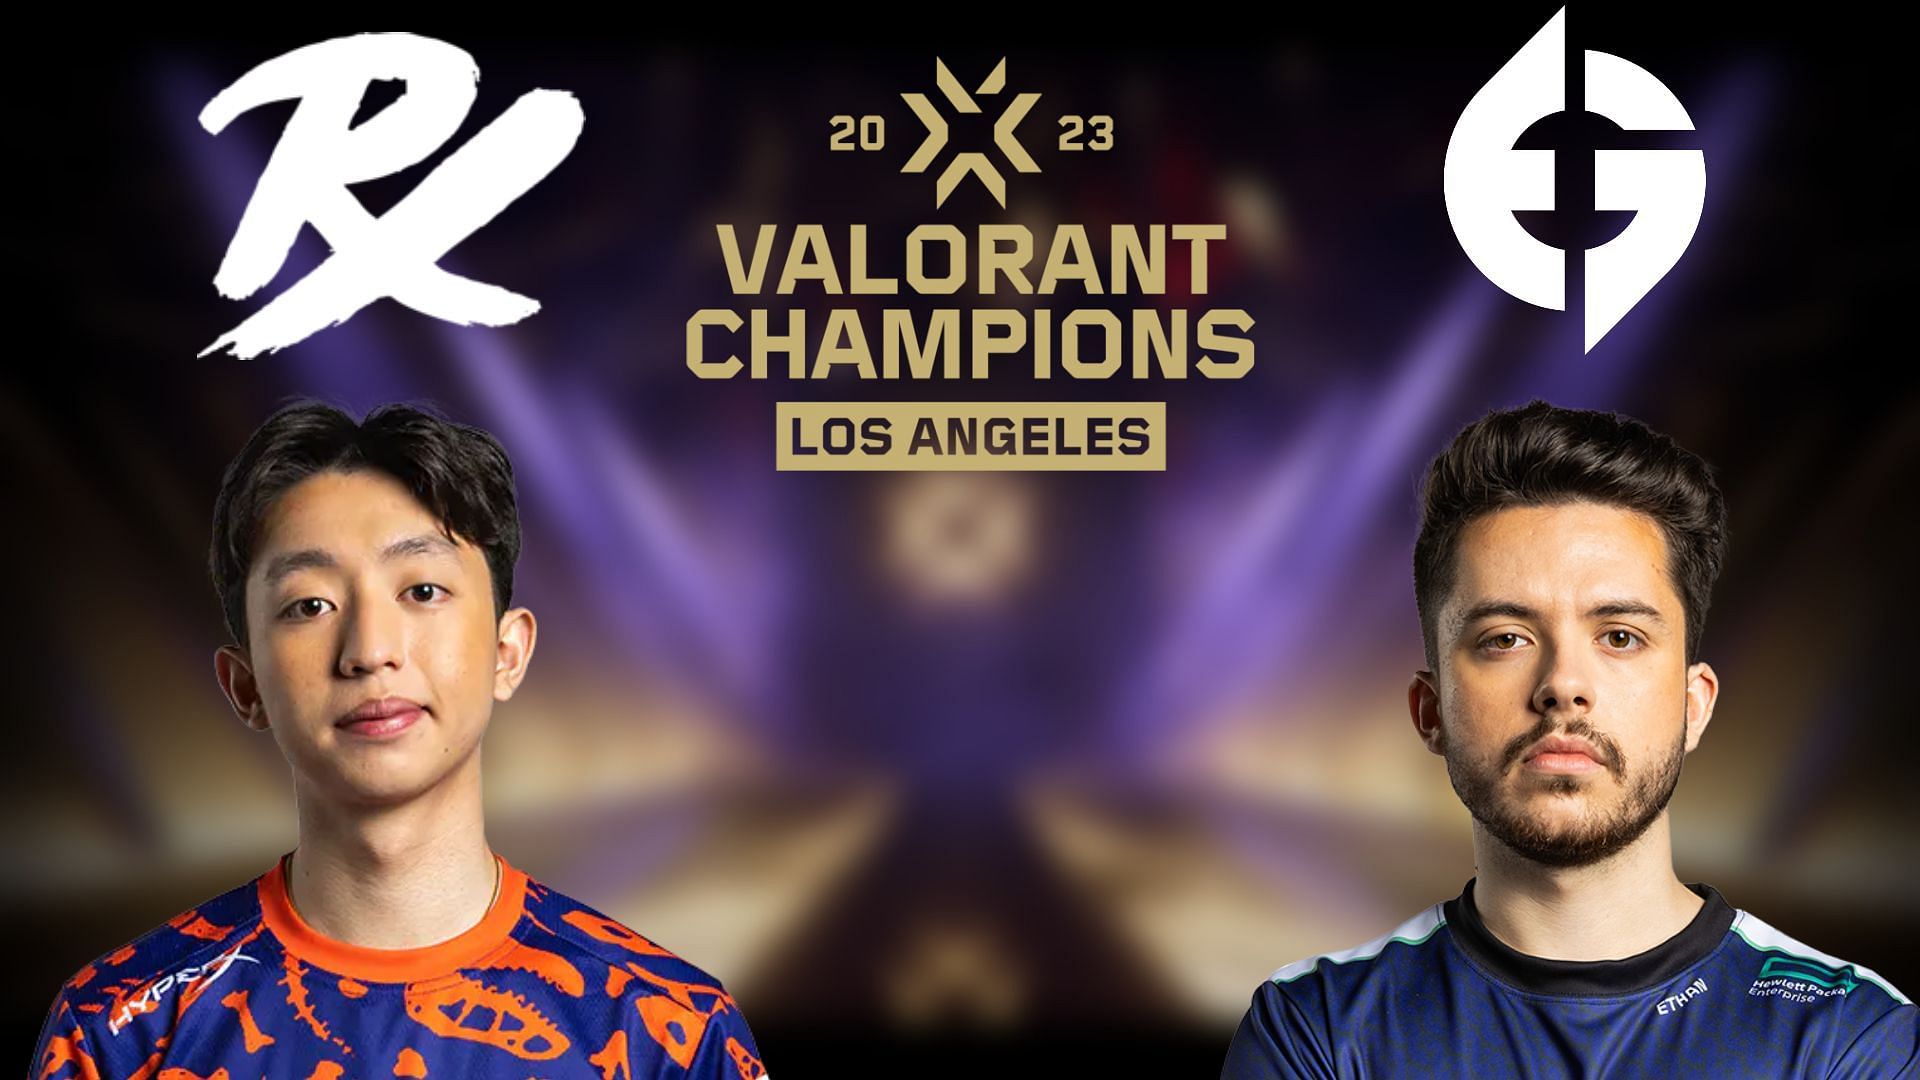 Valorant Esports - GGWP Paper Rex! Thank you for bringing your #WGAMING  style to Tokyo. #VALORANTMasters See you again at Champions.